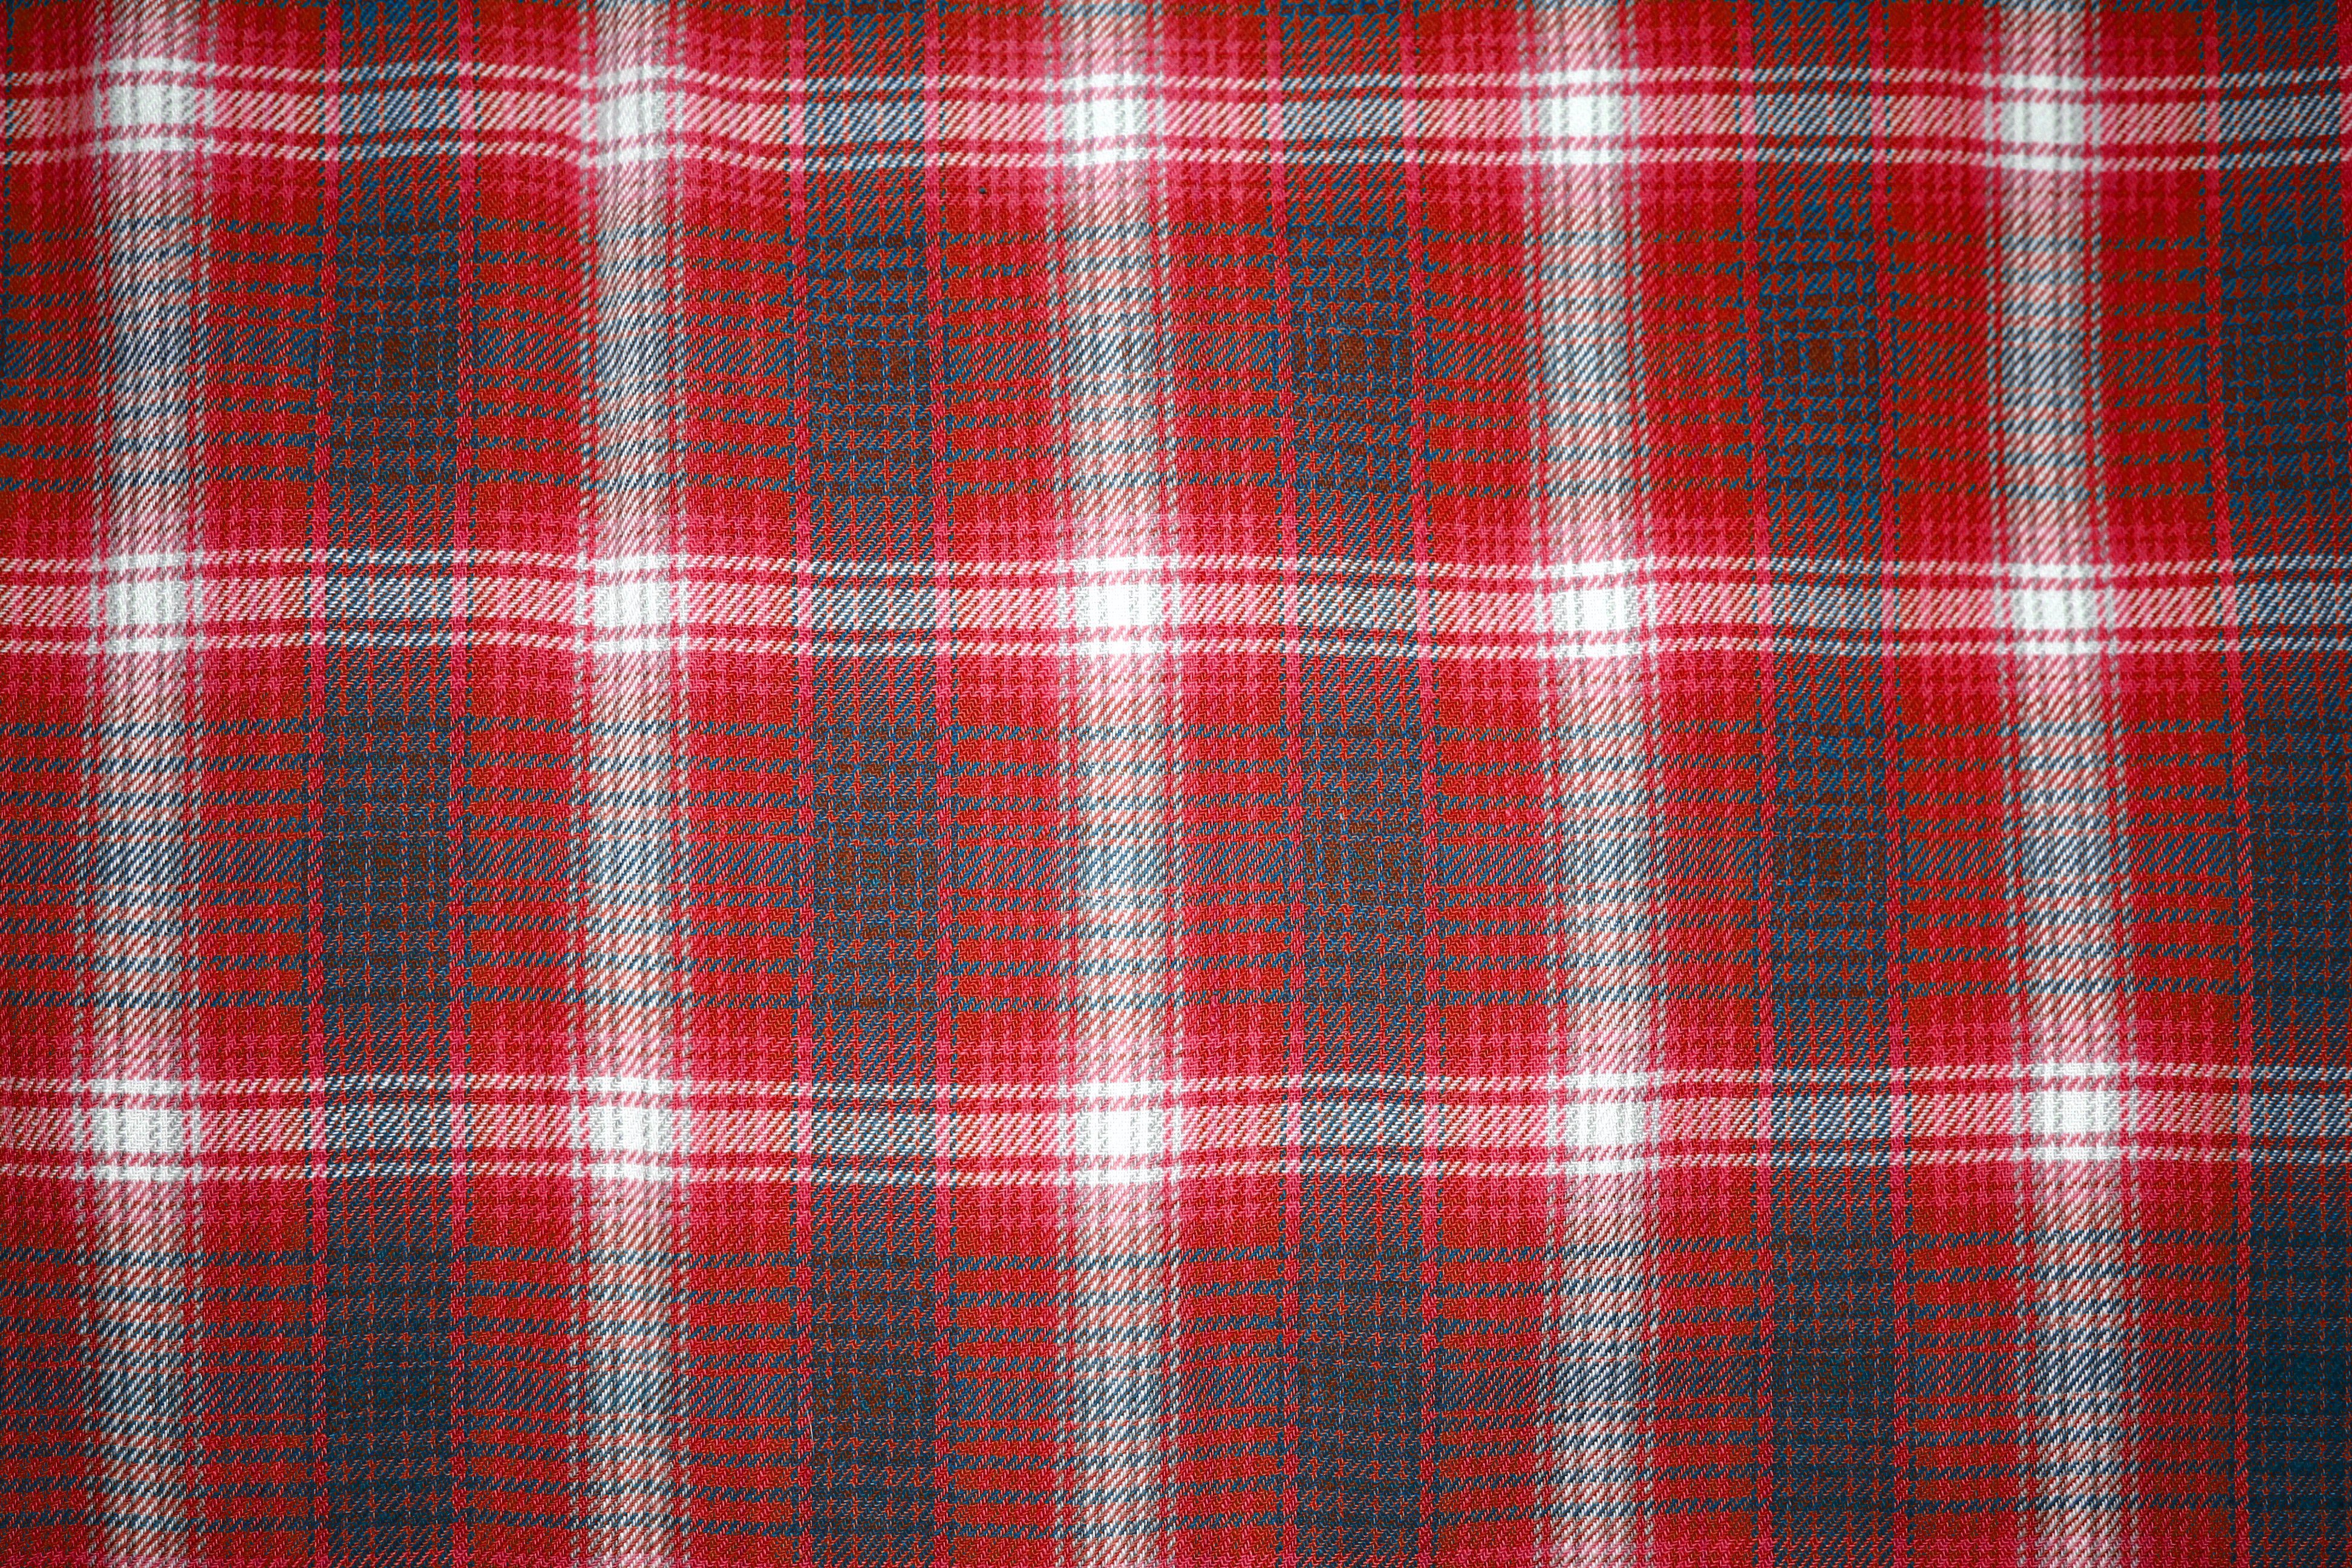 Red and Blue Plaid Fabric Close Up Texture Picture. Free Photograph. Photo Public Domain